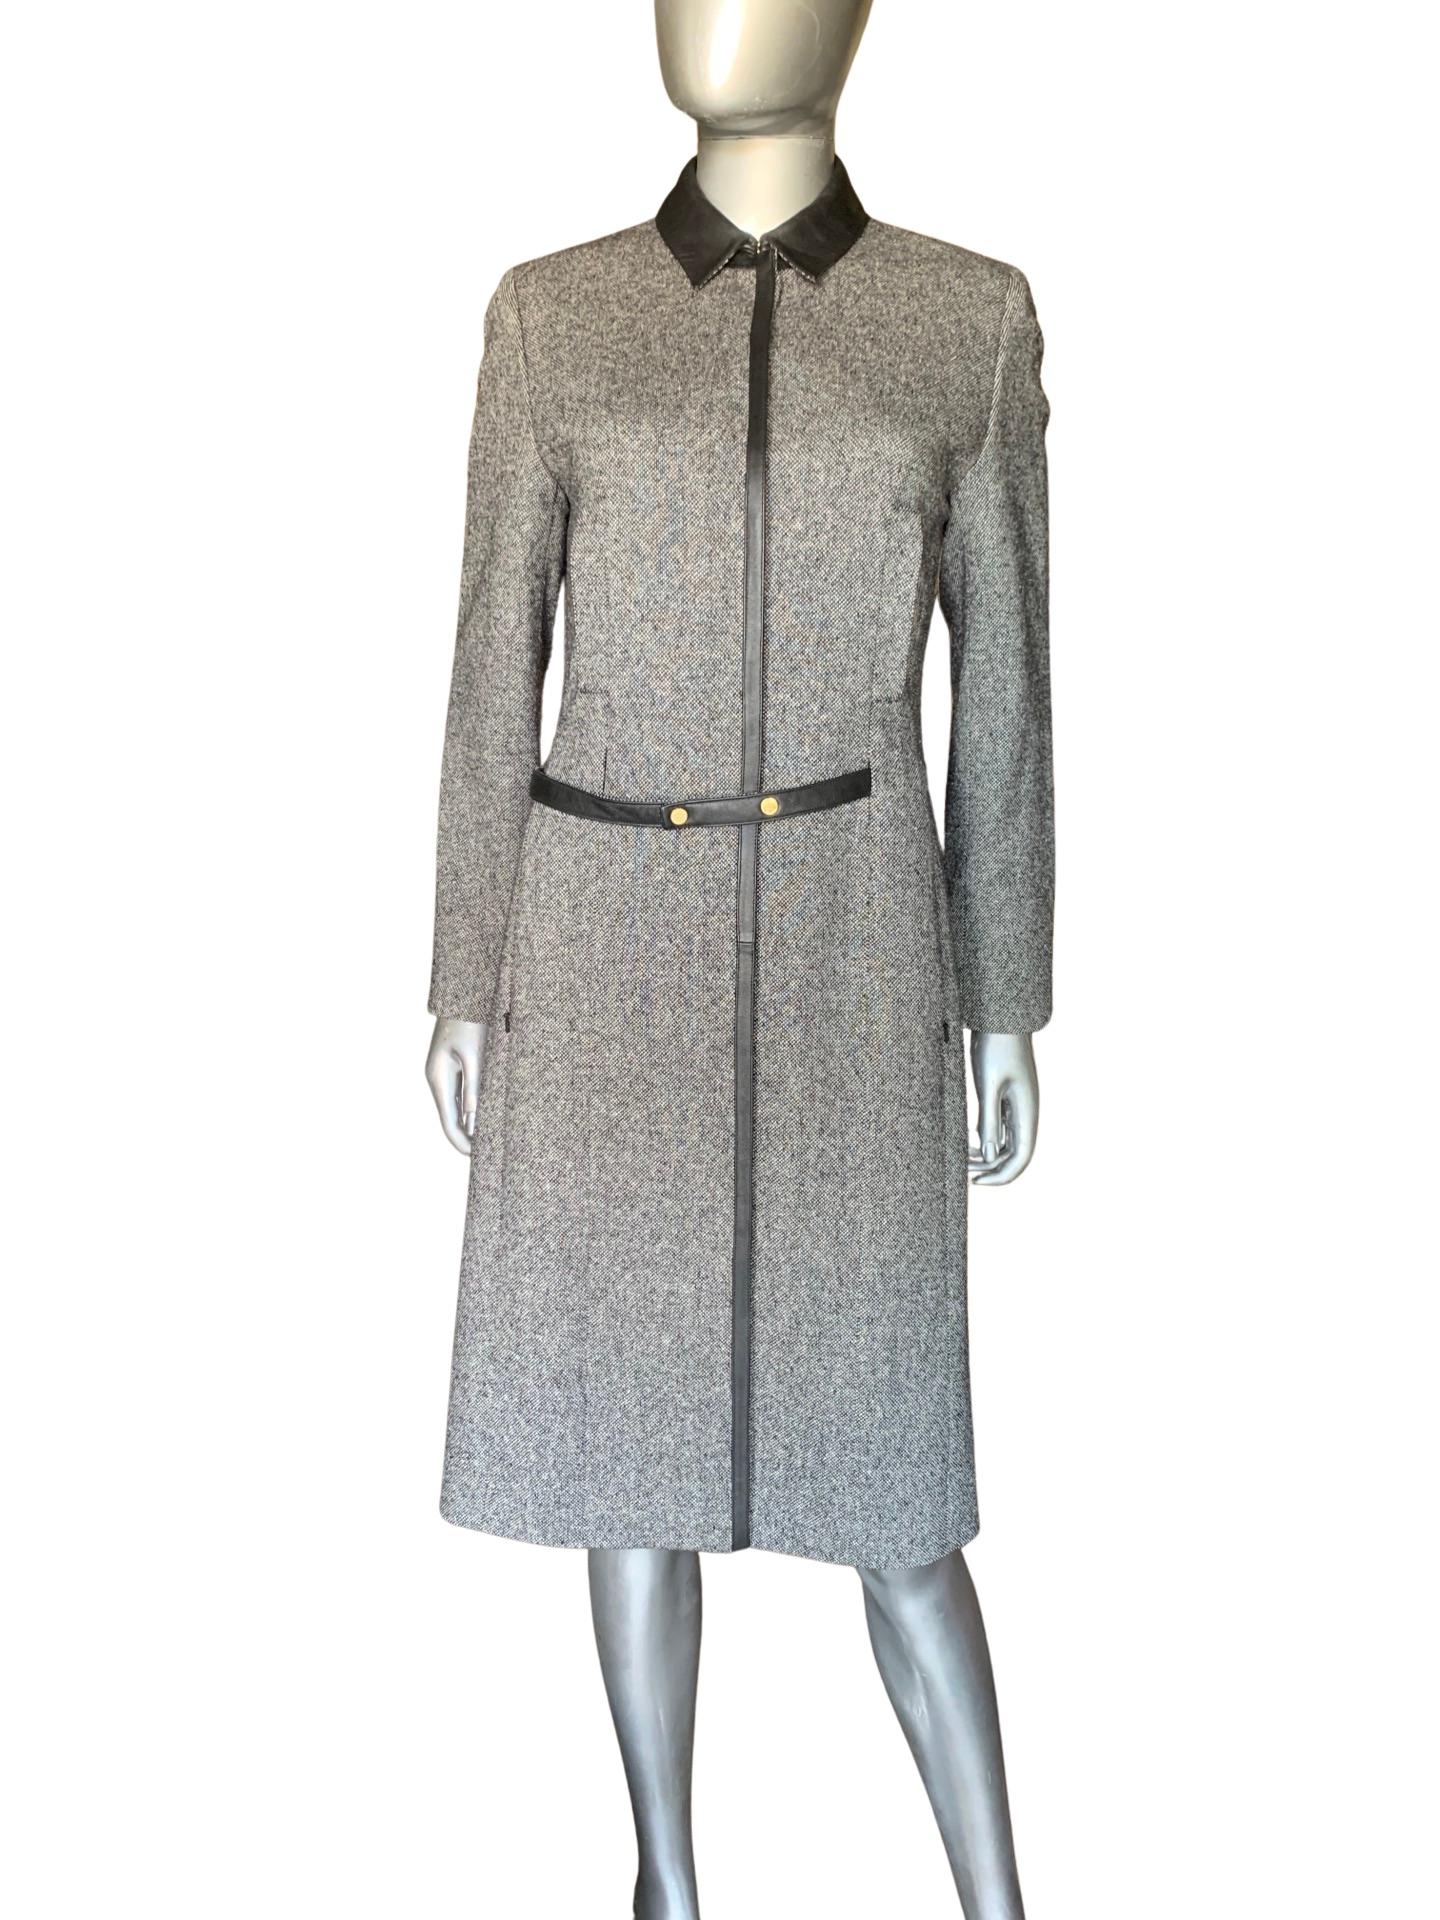 Worth New York Millitary Silk/Wool Coat Dress with Black Leather Trim Size 4 In Good Condition For Sale In Palm Springs, CA